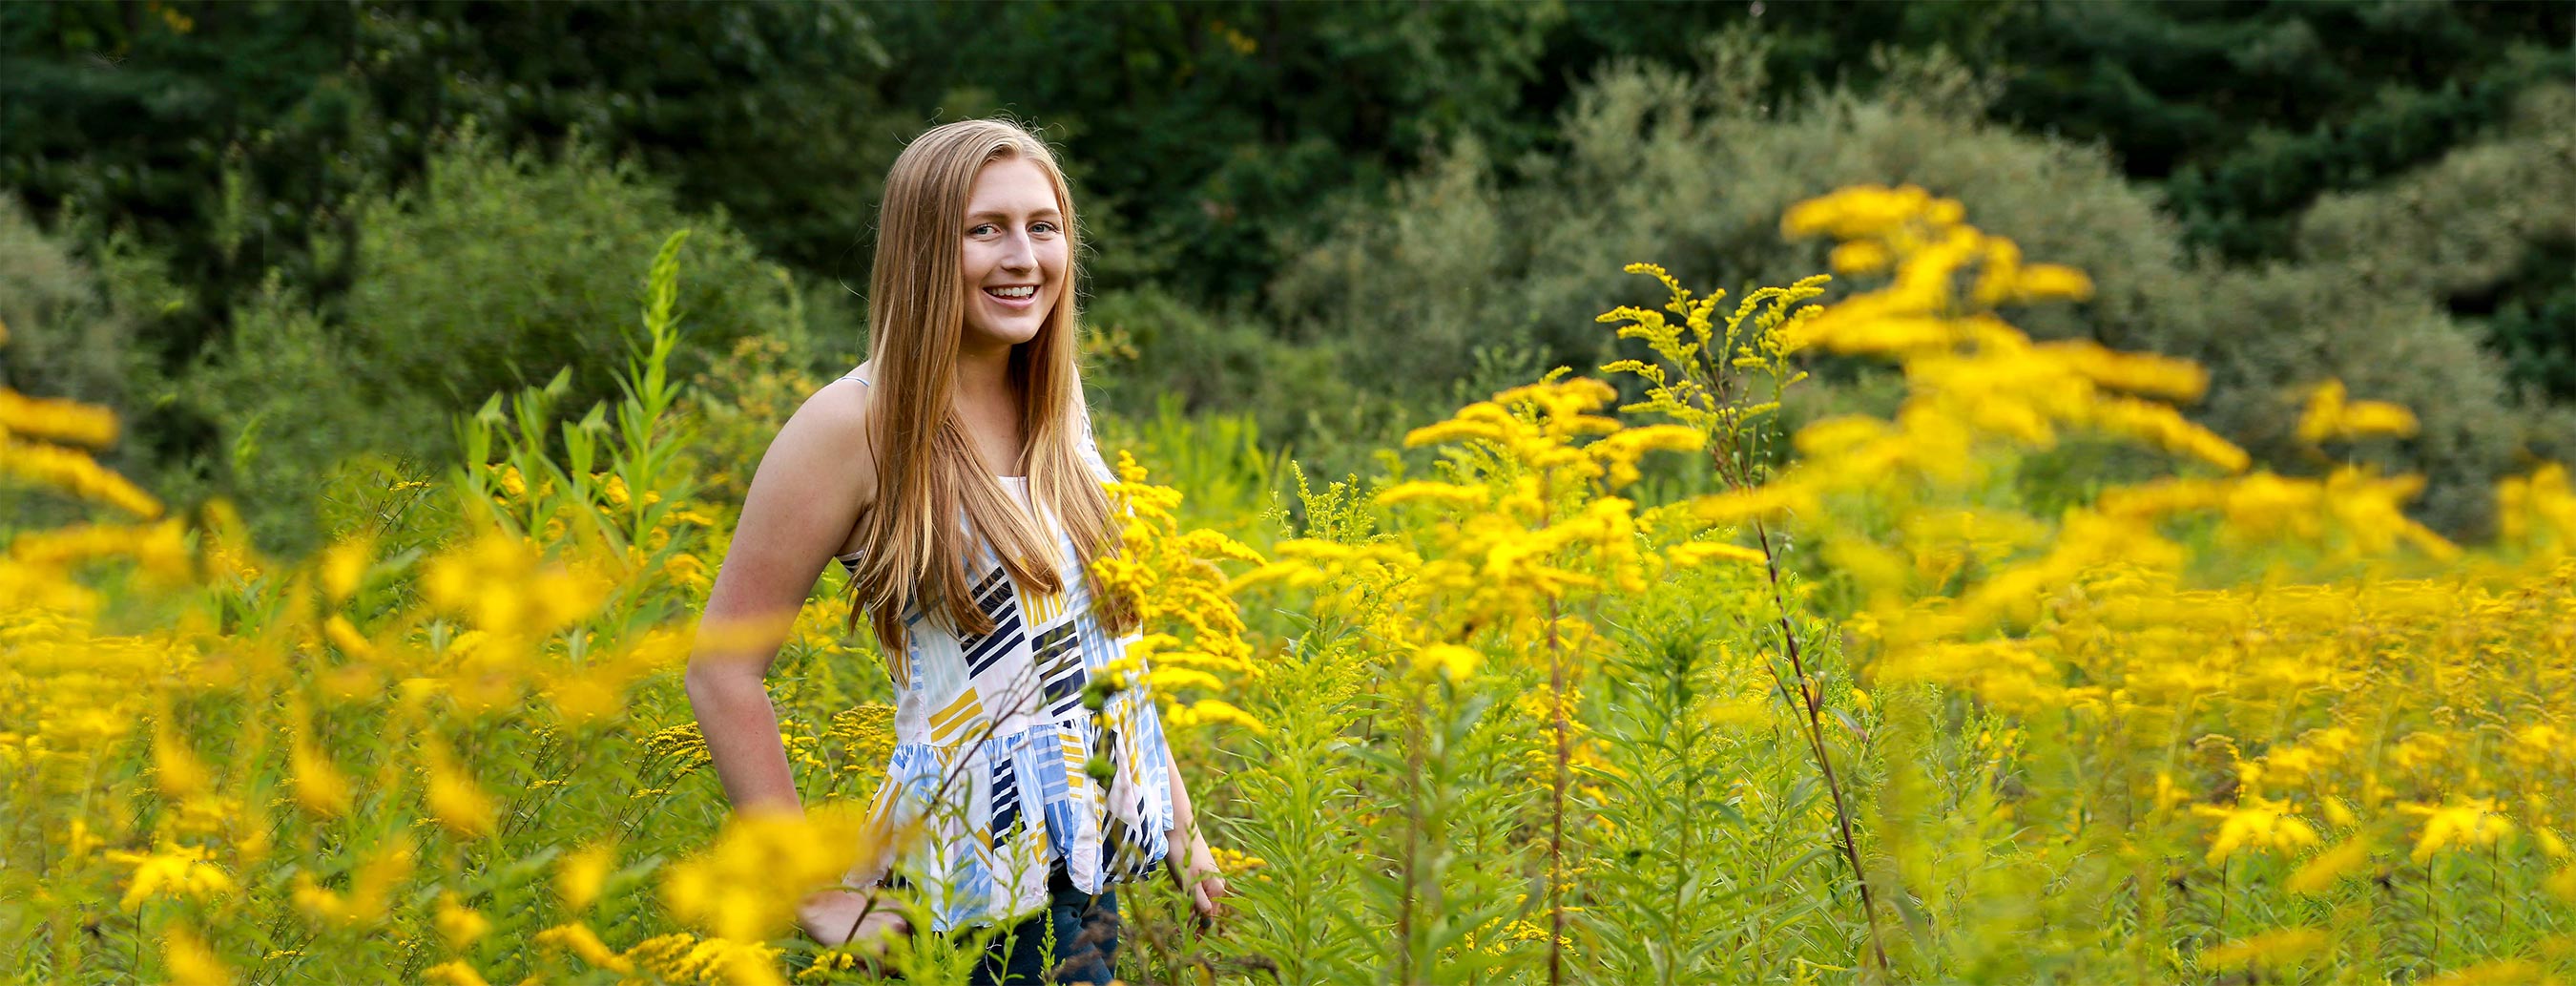 Karleigh standing in a field of flowers